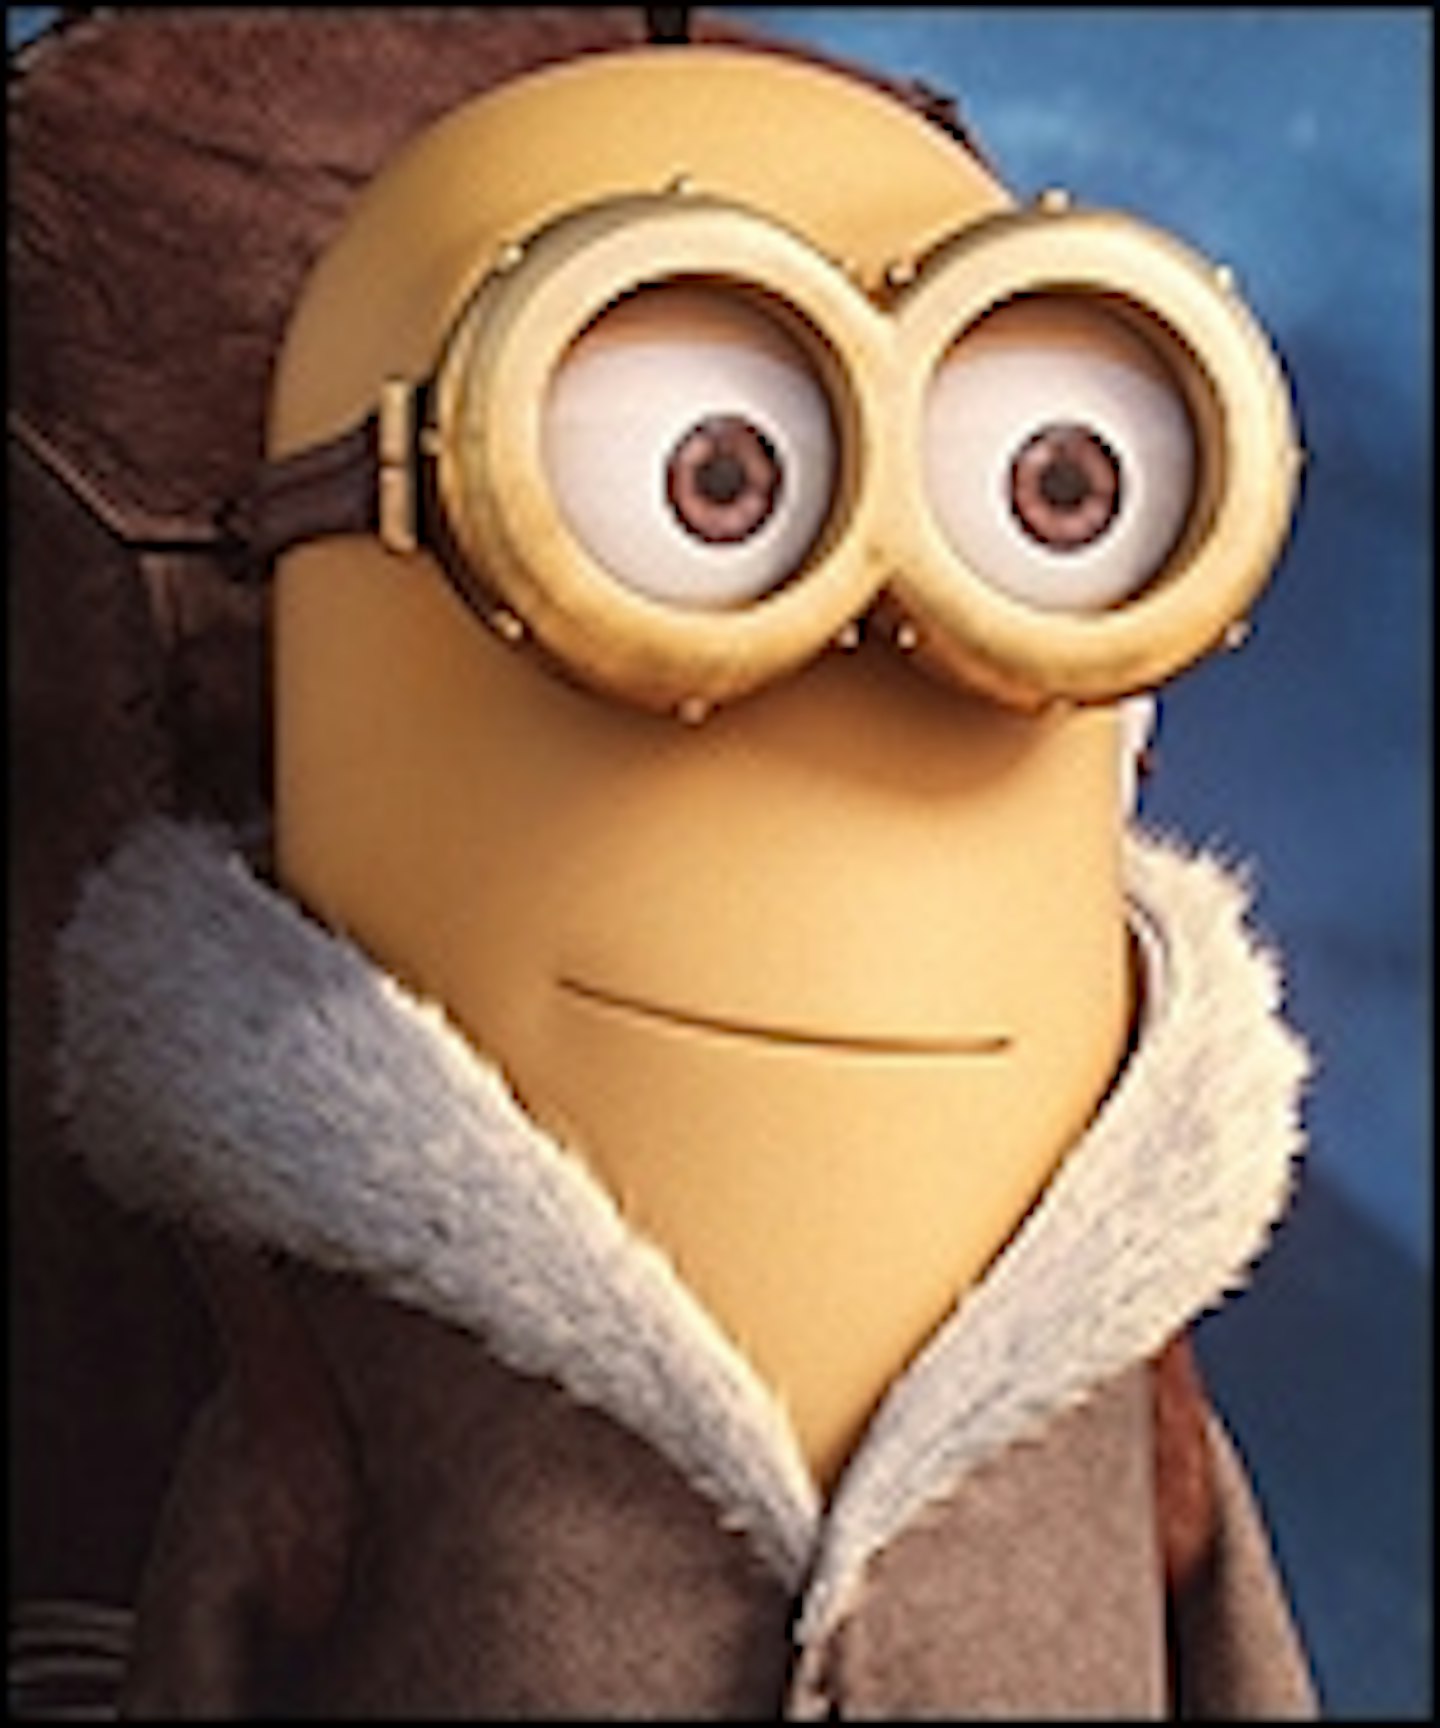 New Minions Trailer Hitches A Ride Online